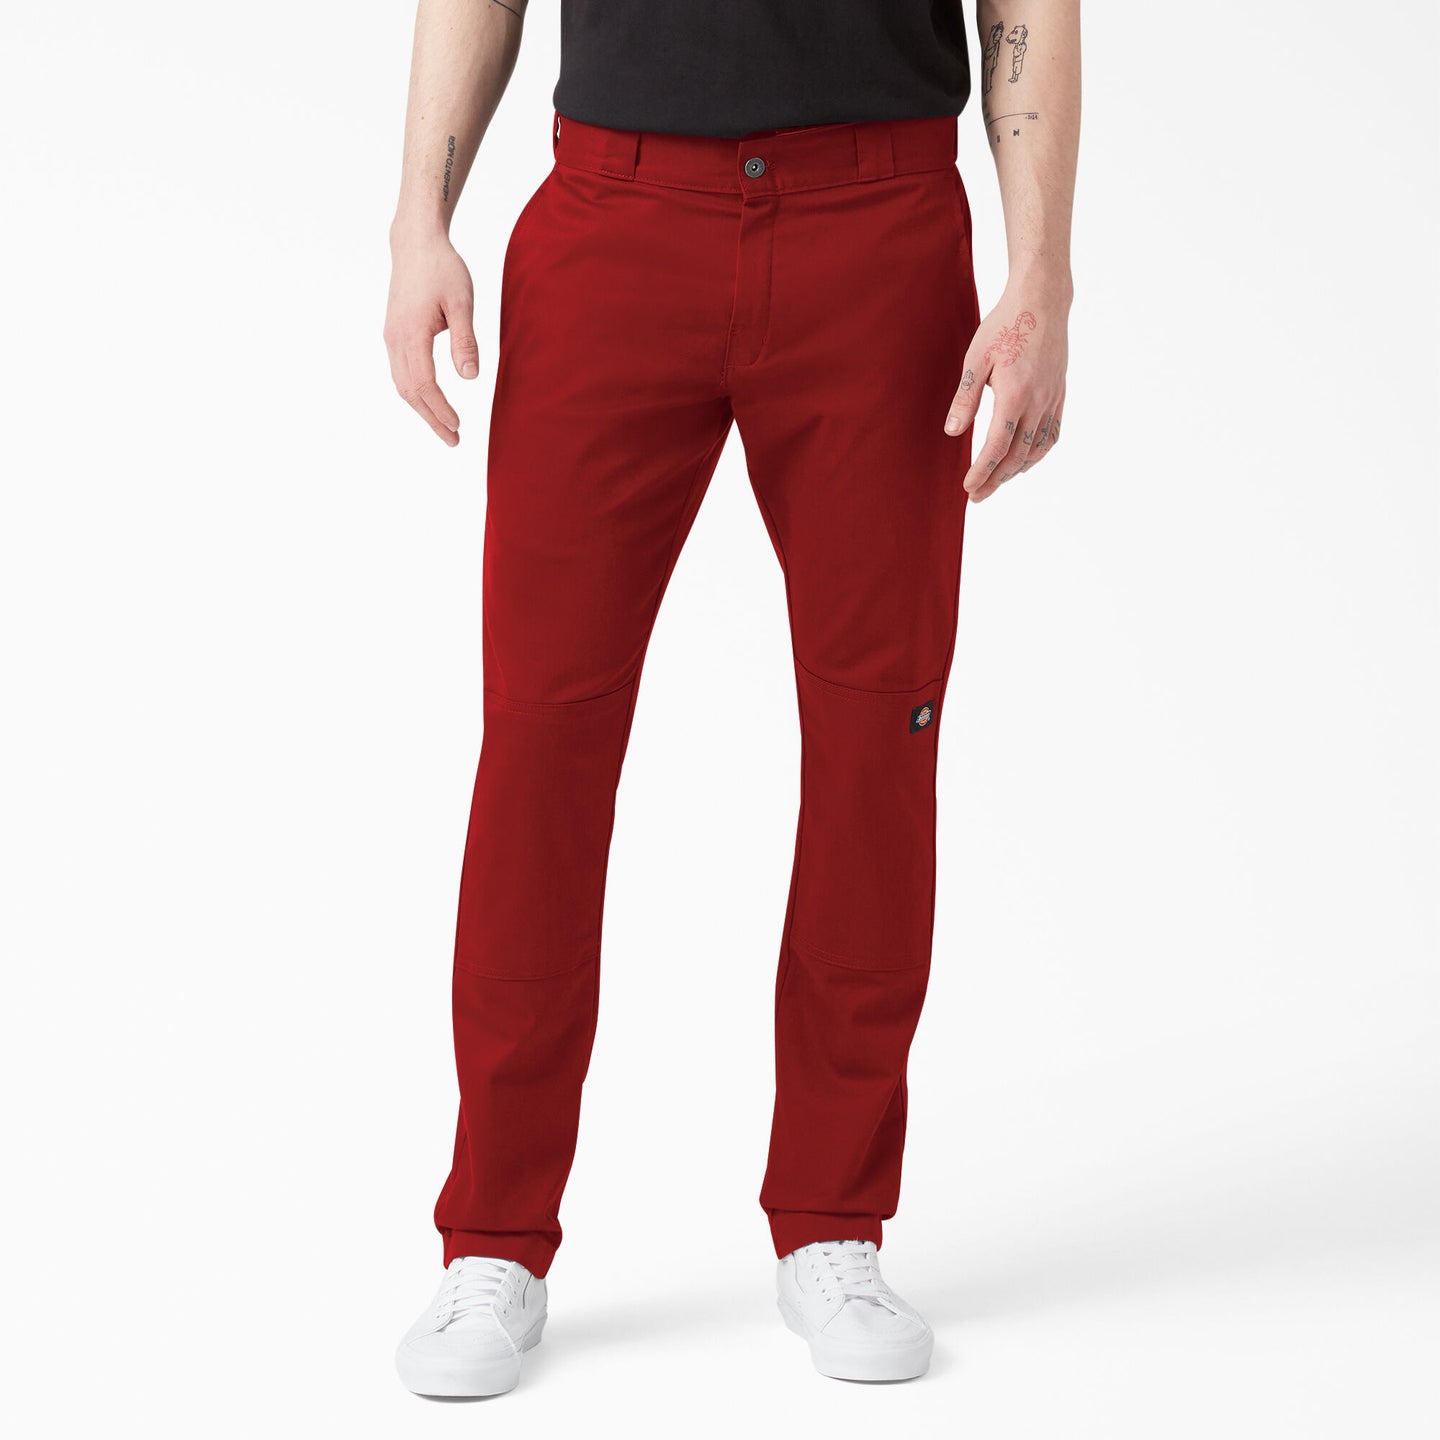 Skinny Fit Straight Leg Double Knee Work Pants - English Red